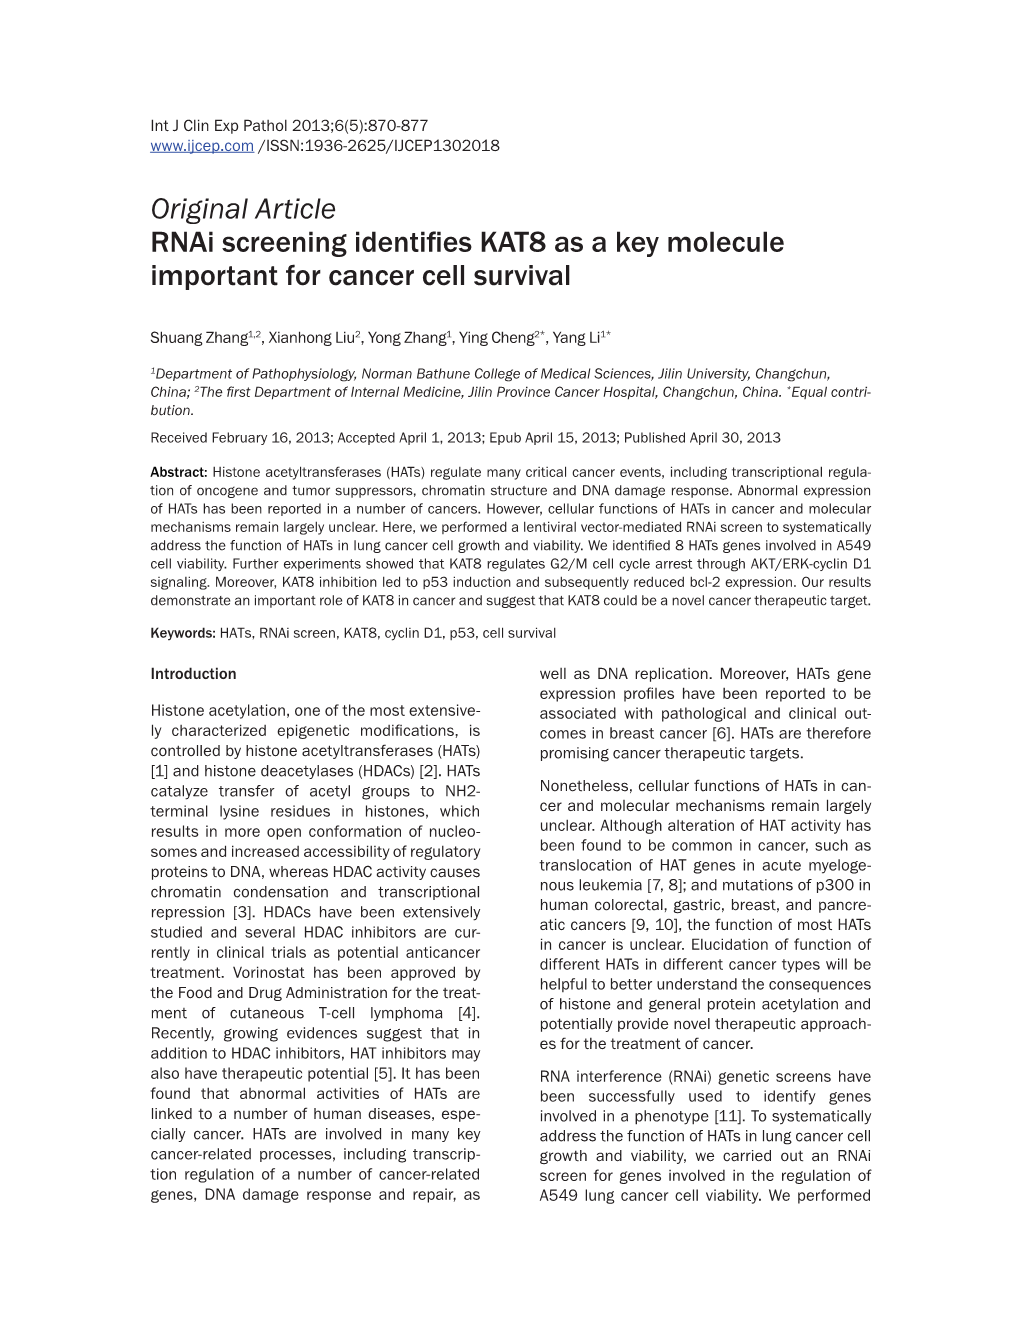 Original Article Rnai Screening Identifies KAT8 As a Key Molecule Important for Cancer Cell Survival